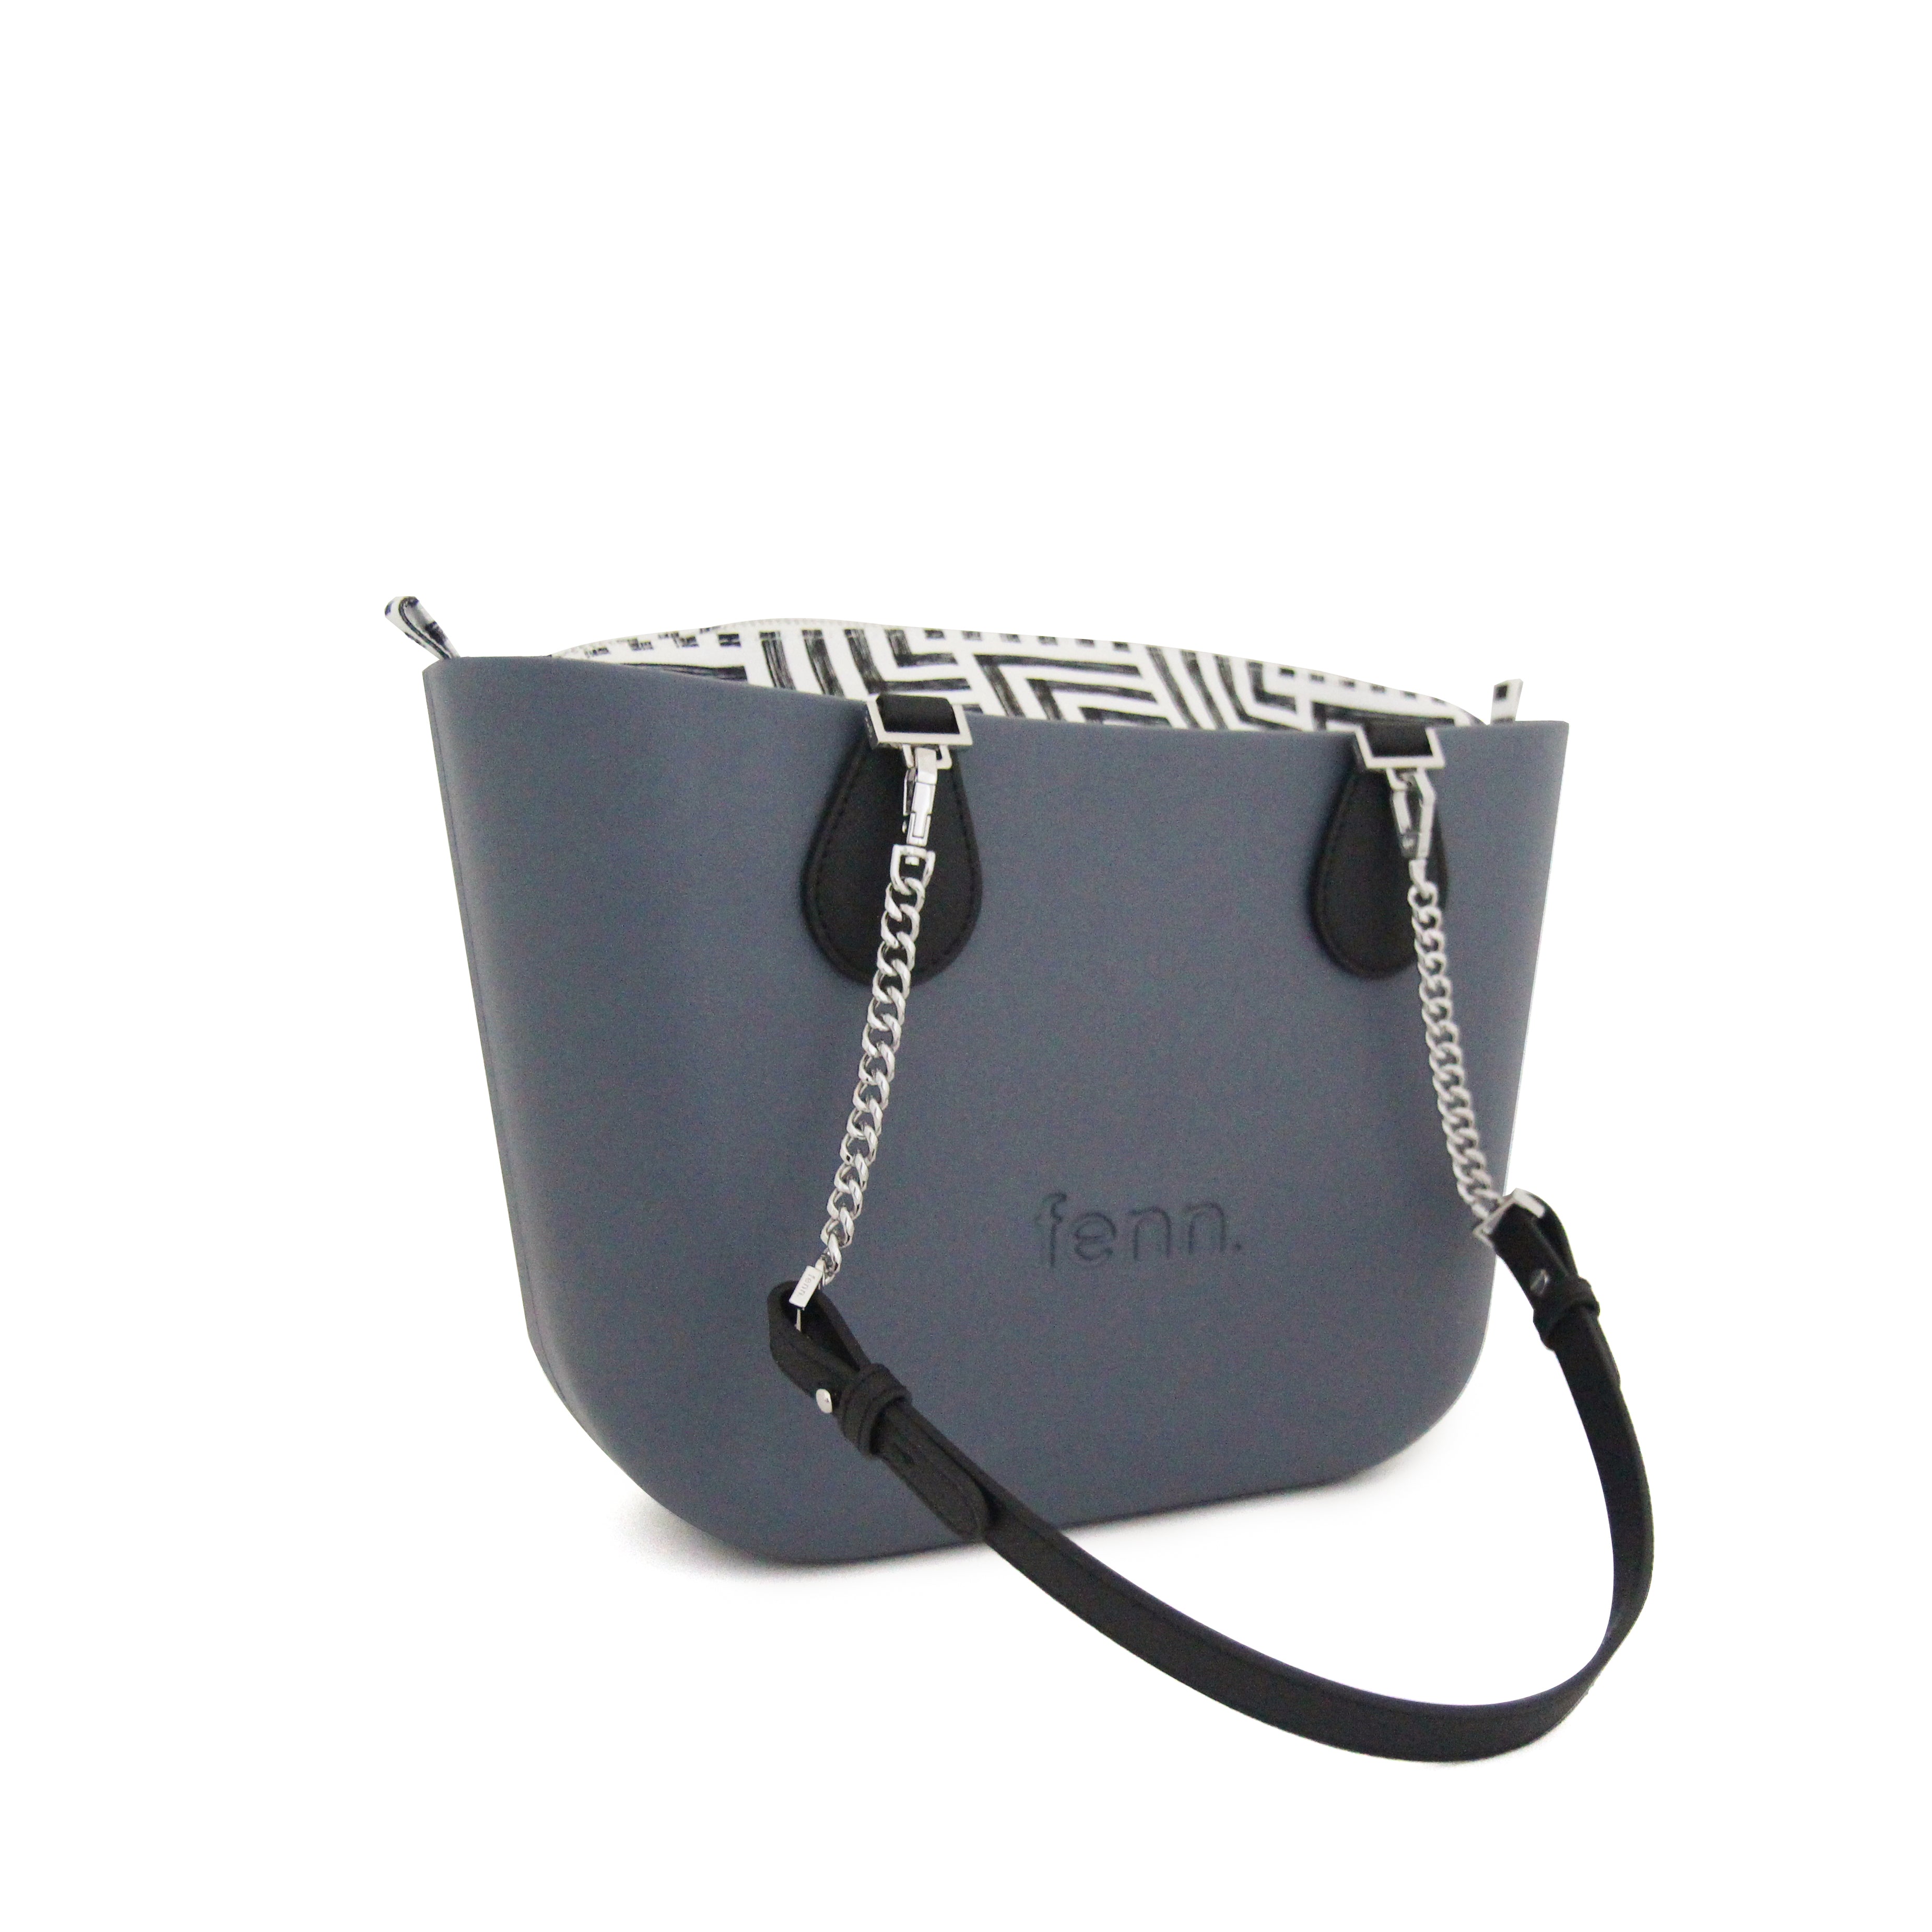 Petite DENIM BLUE with black & white canvas inner and denim blue / silver chain handle